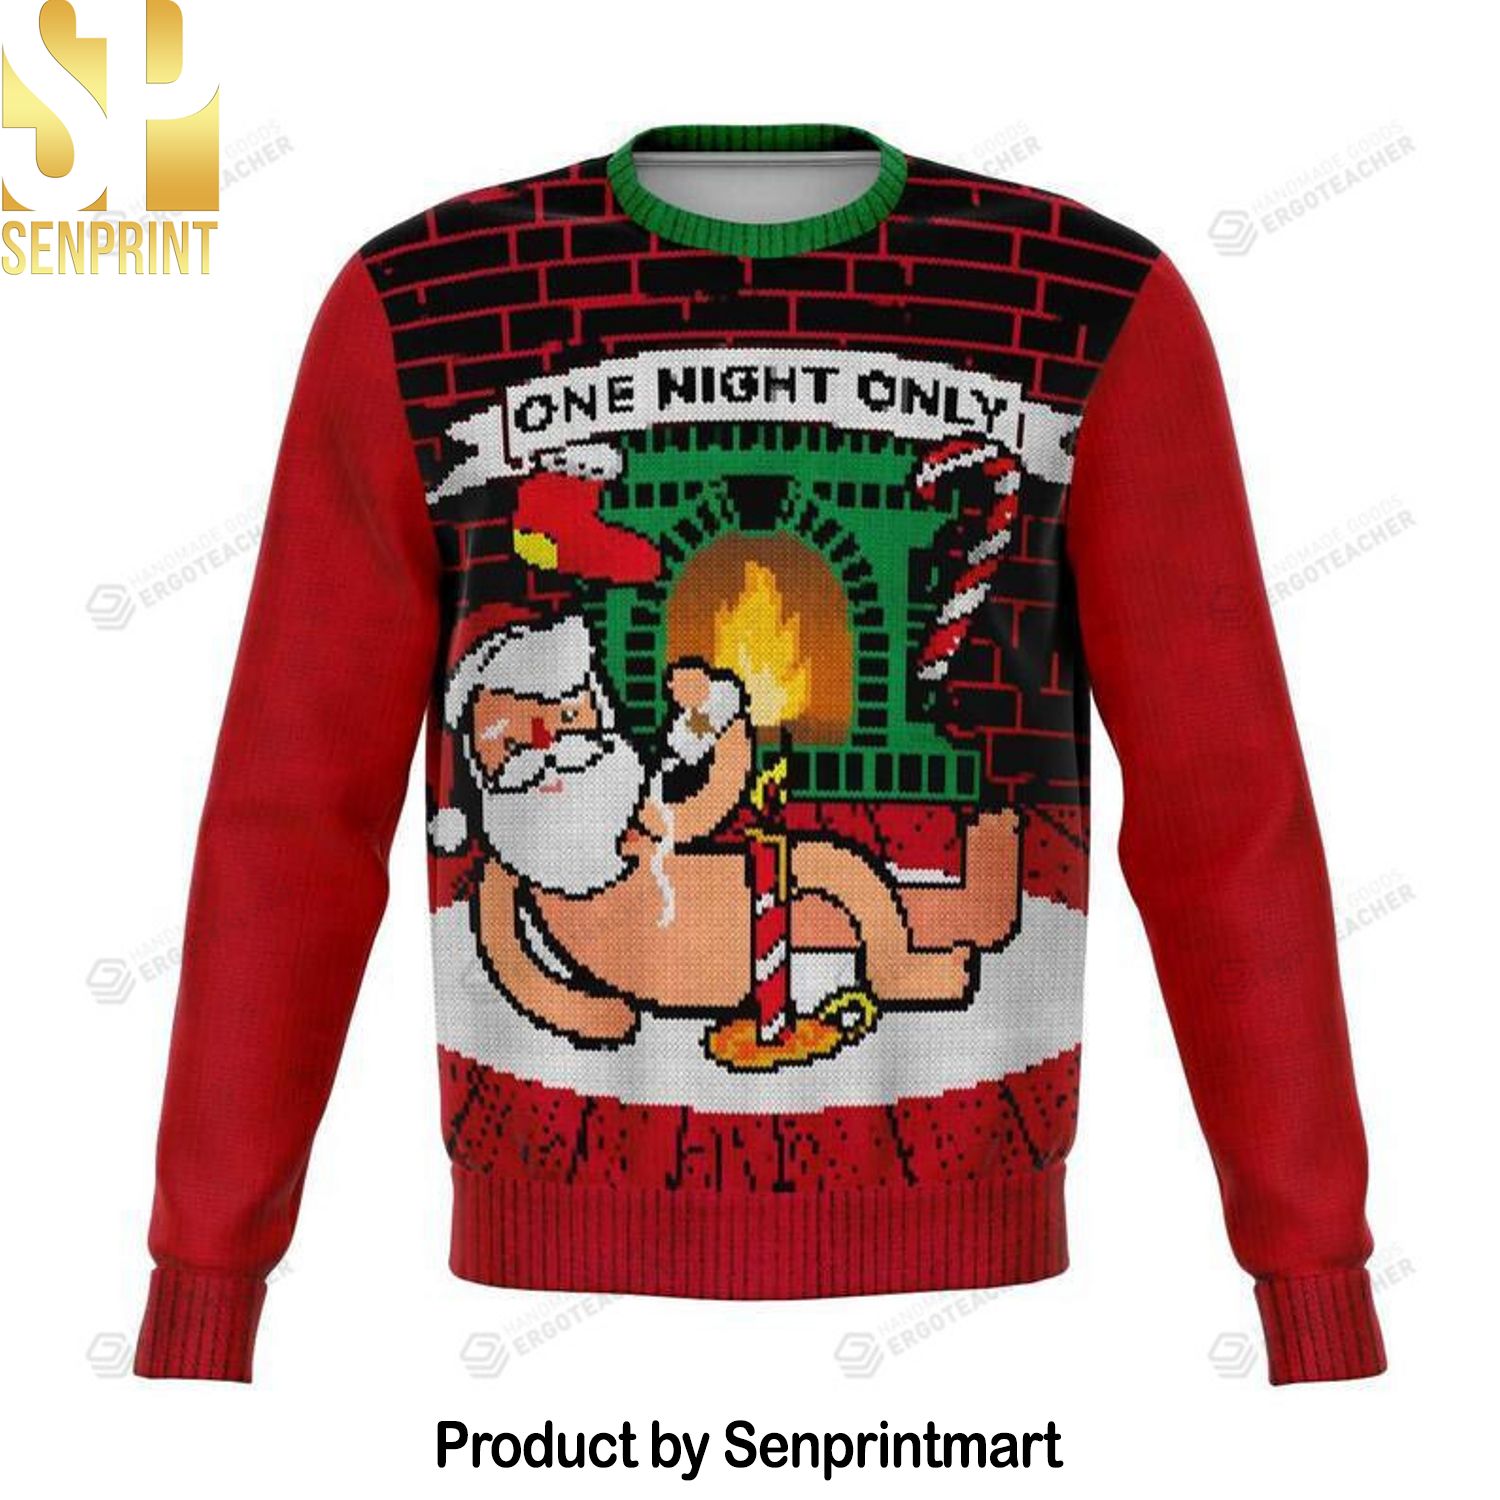 One Night Only Jumper Naughty Santa Rude Cheeky For Christmas Gifts Ugly Xmas Wool Knitted Sweater